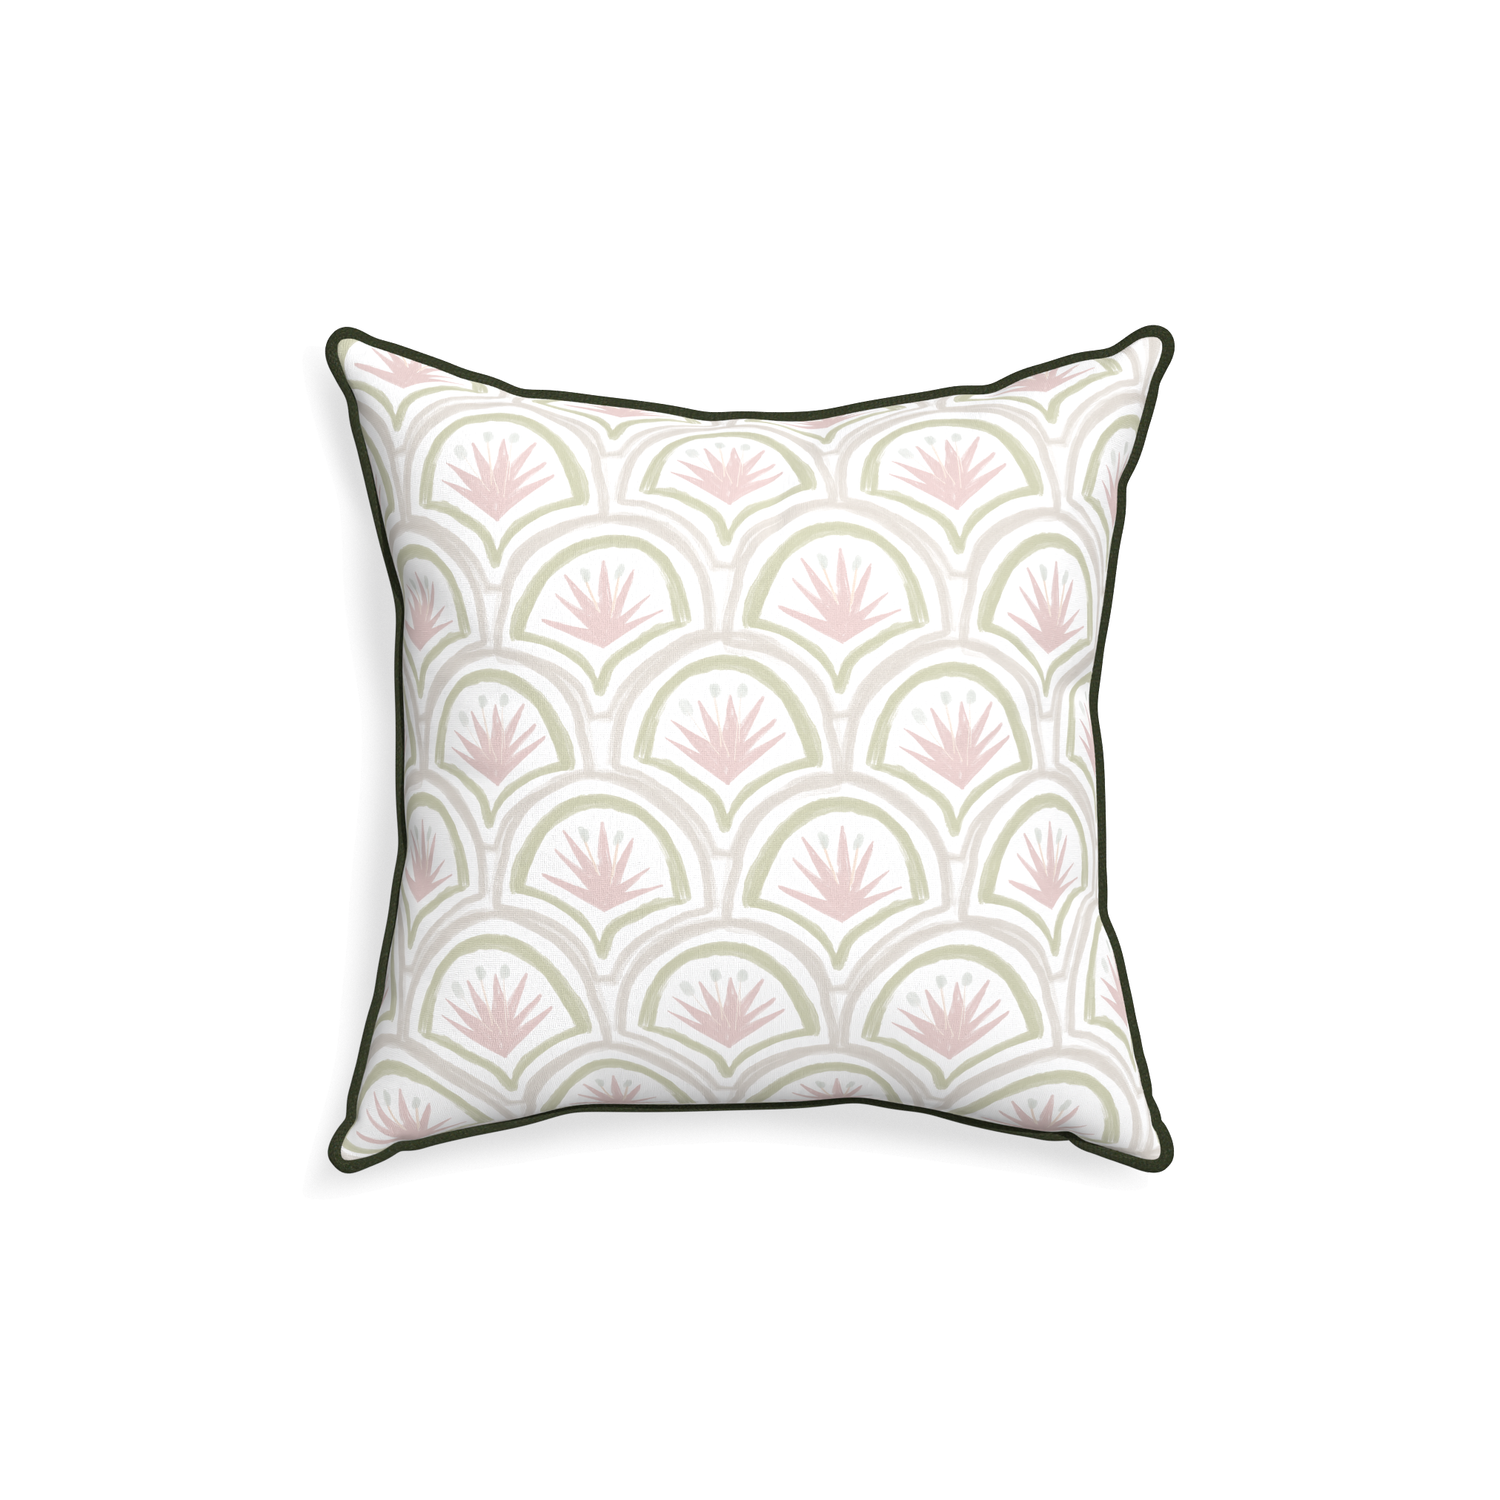 18-square thatcher rose custom pink & green palmpillow with f piping on white background